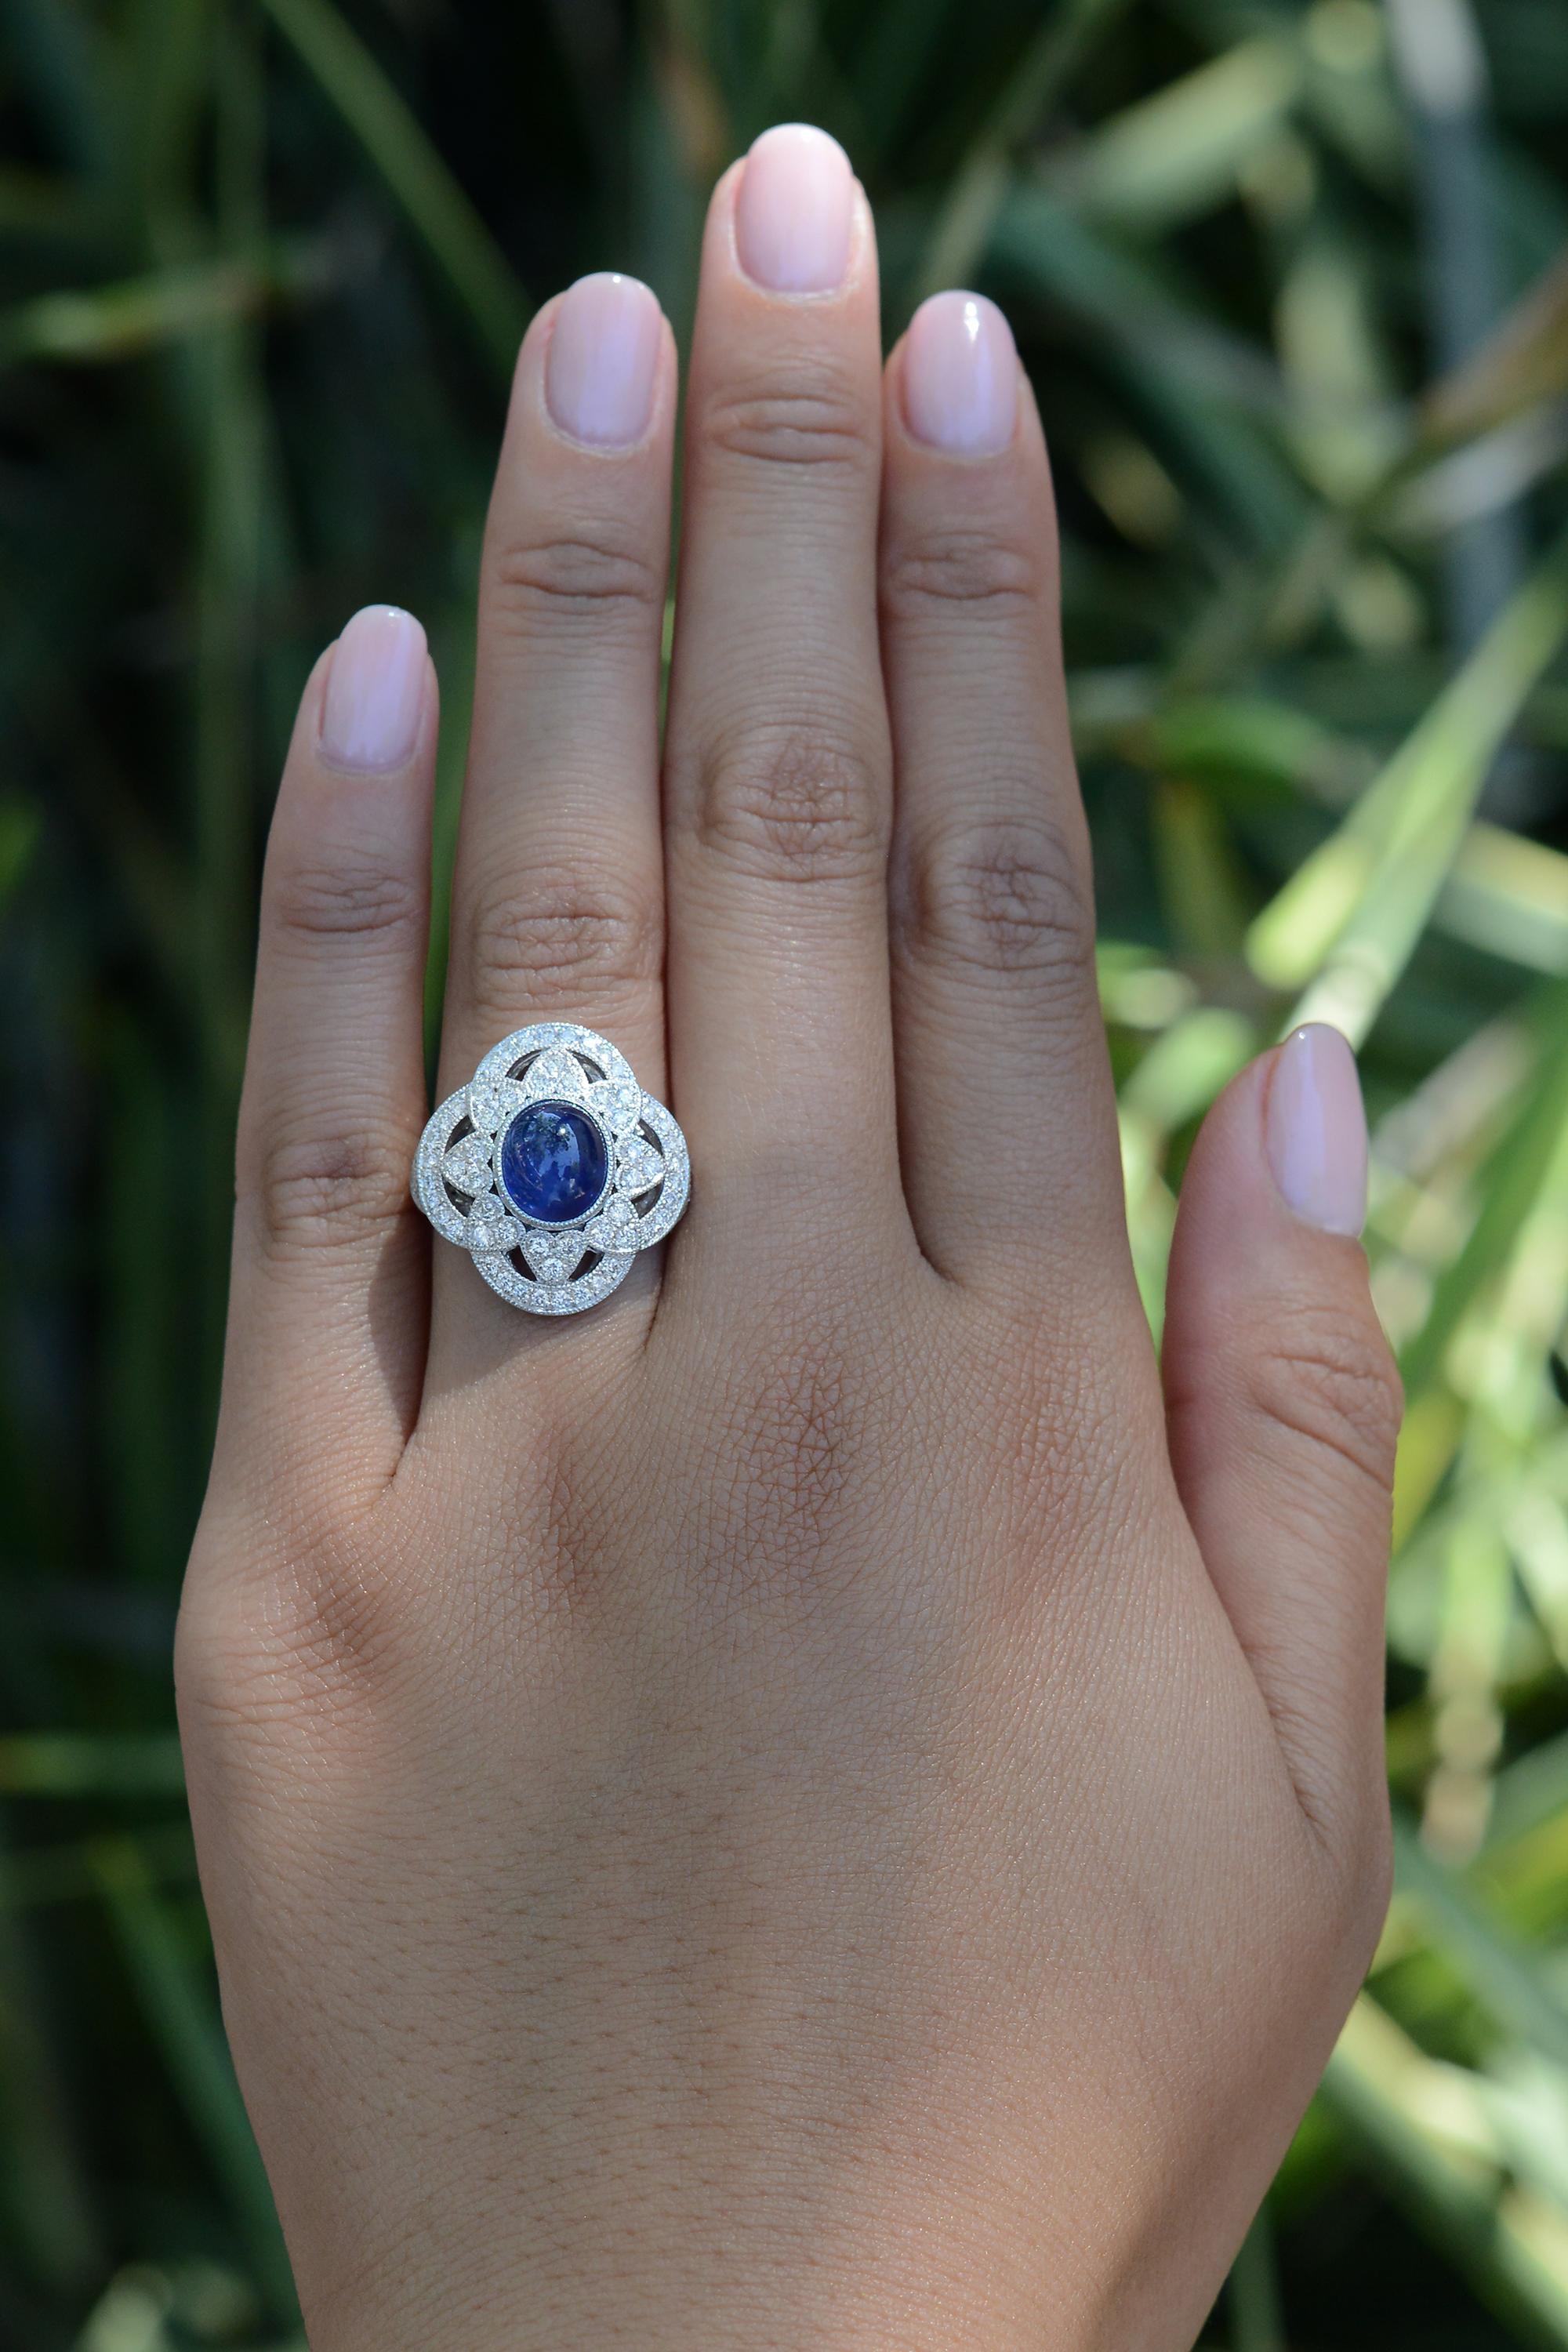 A tasteful right-hand cocktail ring with the perfect amount of flair and finger coverage. The cabochon cut sapphire is a silky blue color with even color and deep saturation throughout. Surrounding the 3.79 carat gem, a halo of platinum hearts with